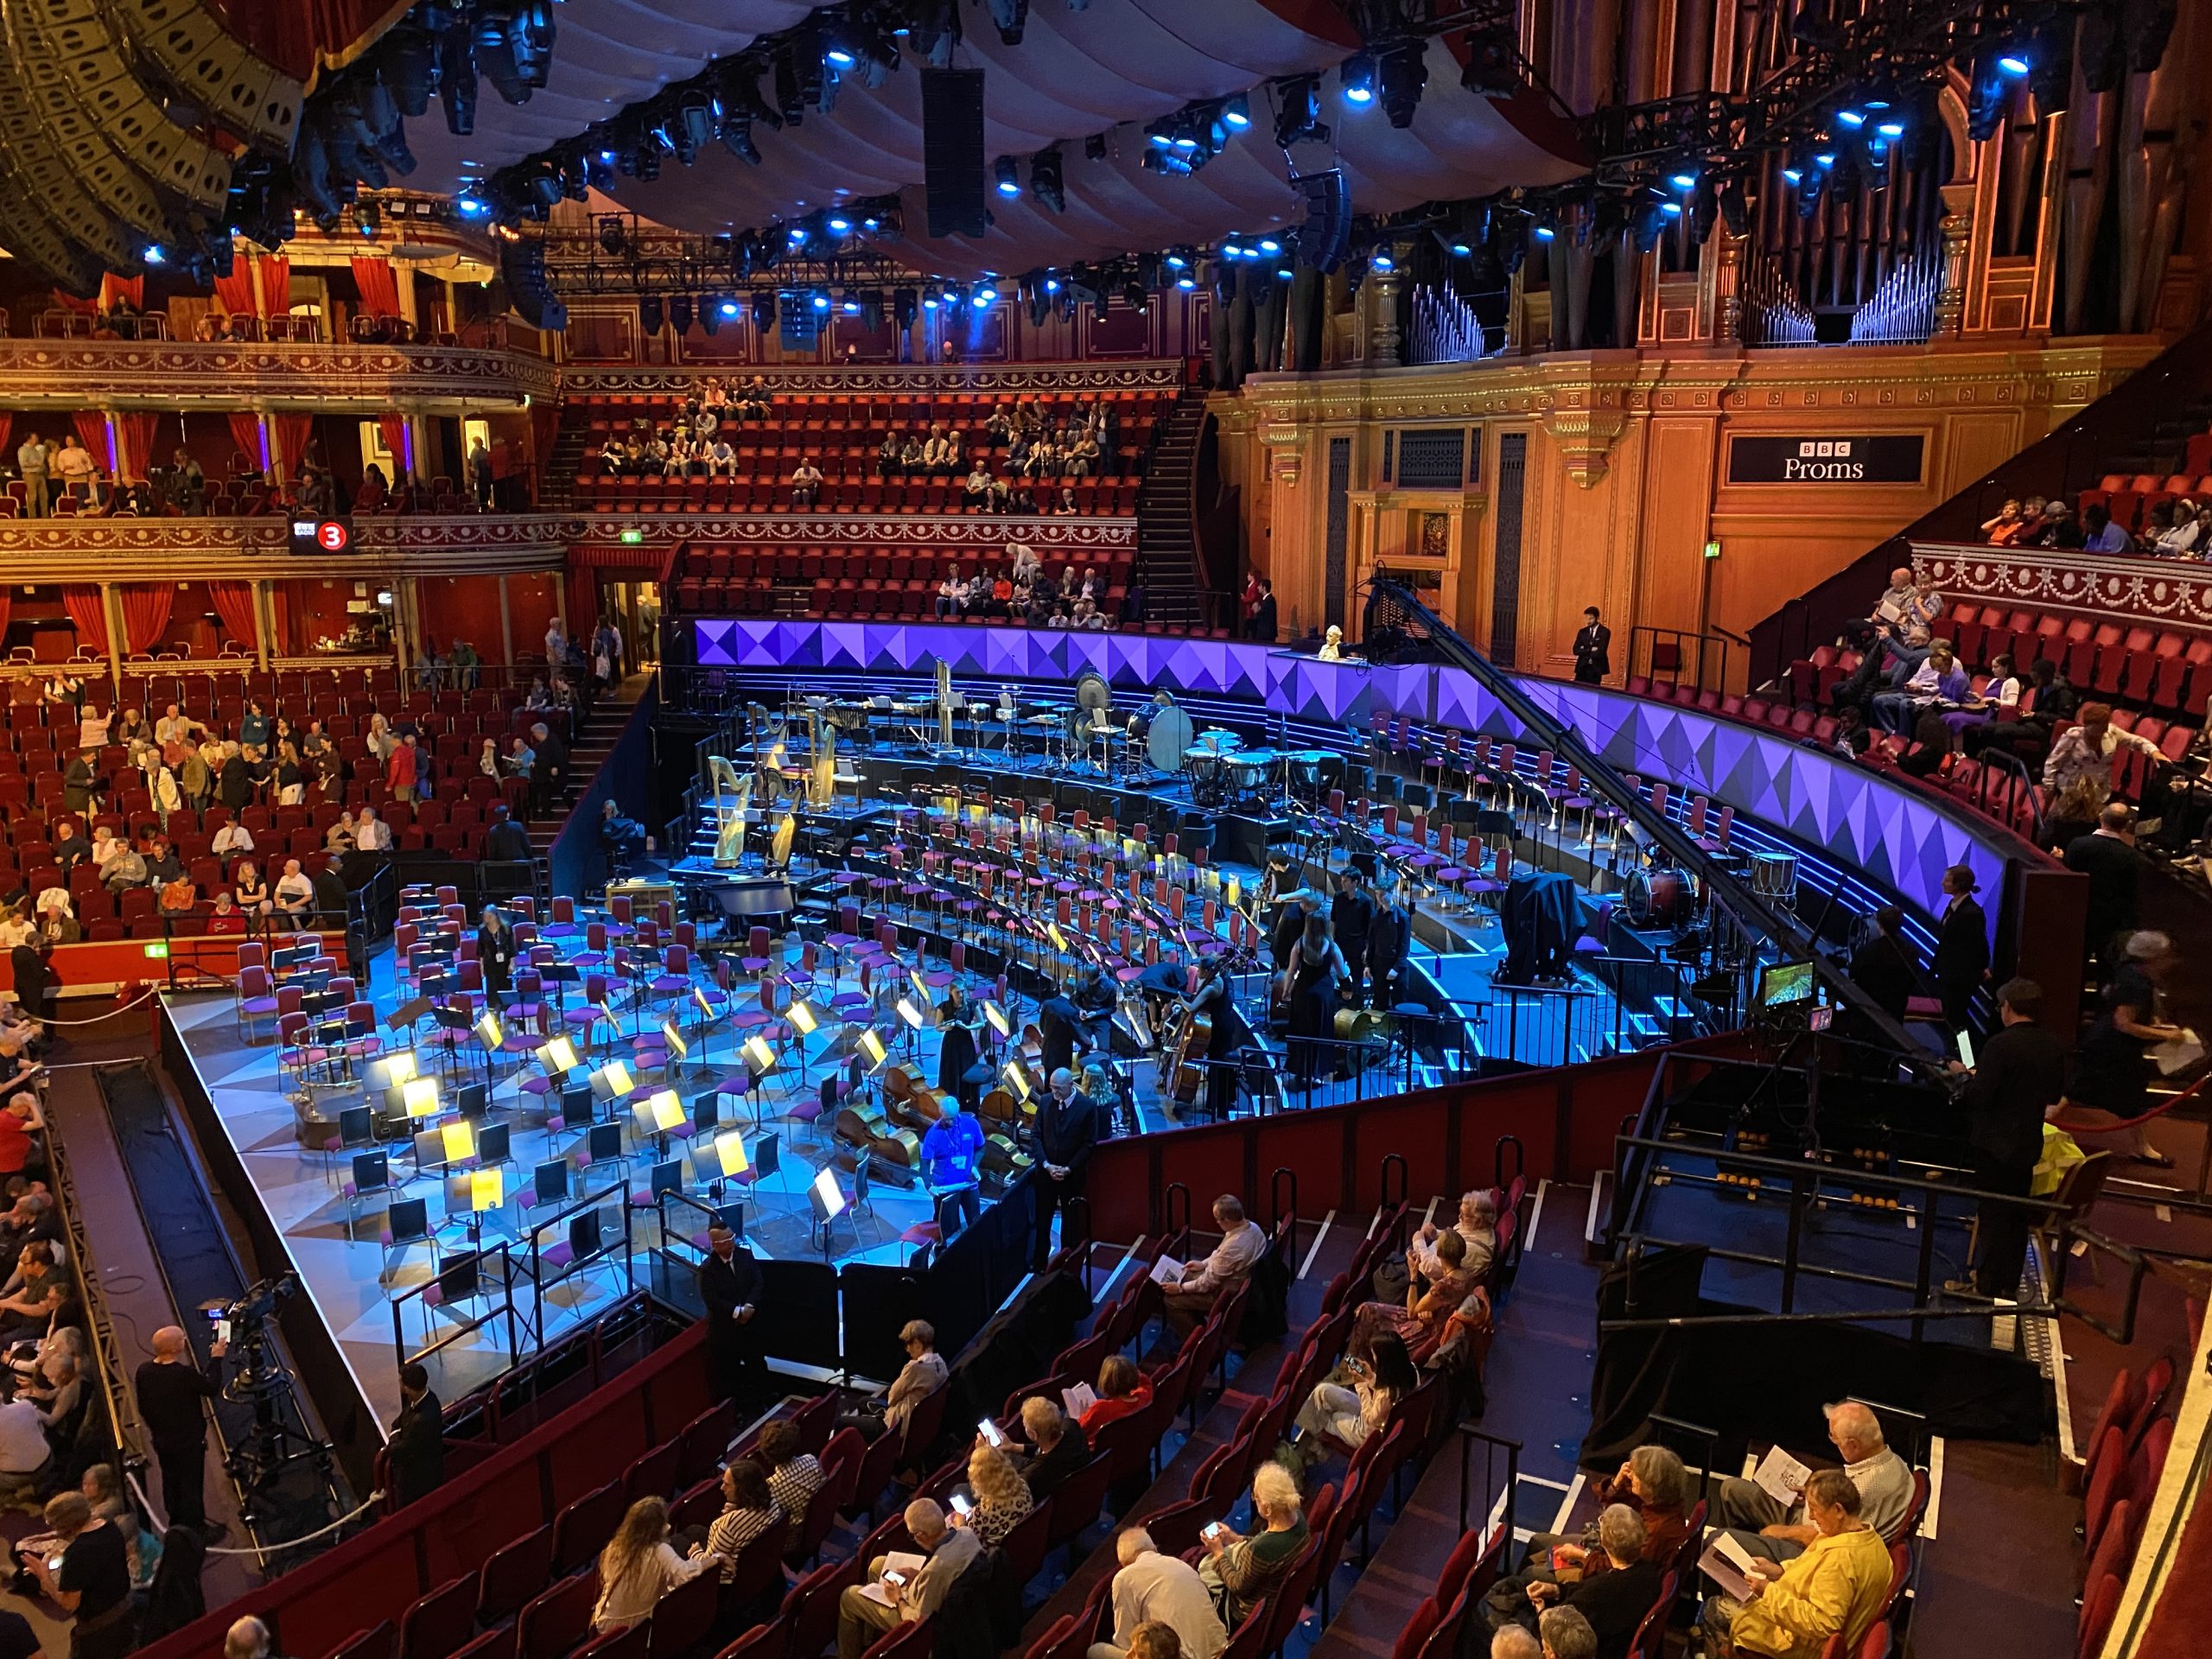 The stage of the Royal Albert Hall